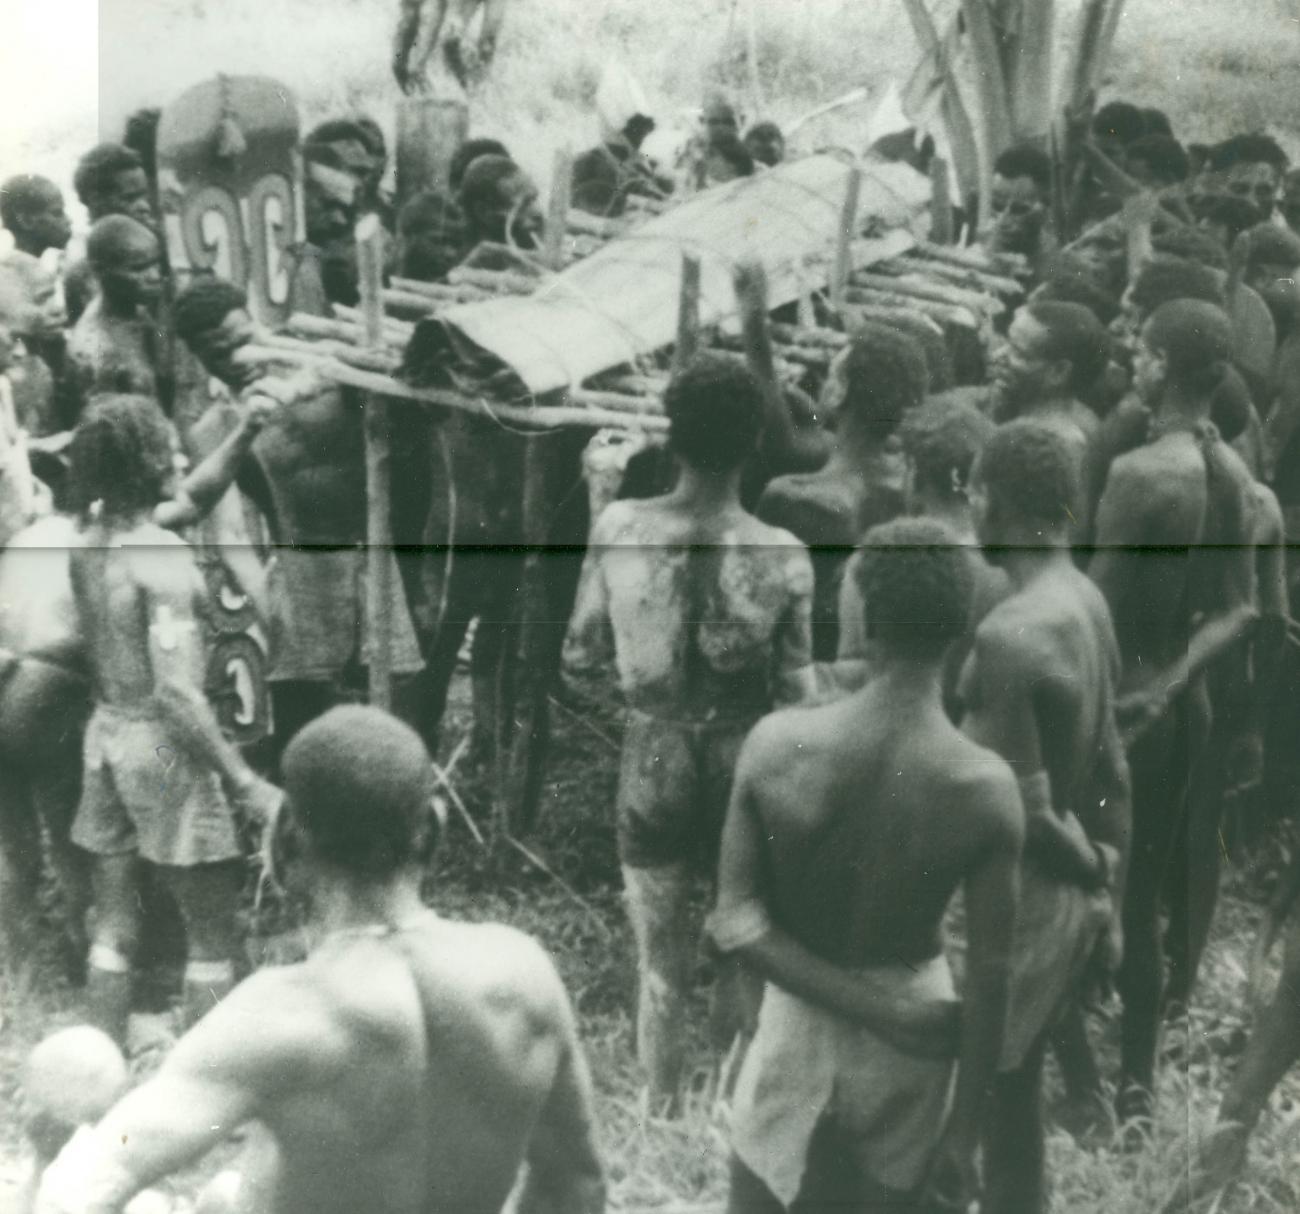 BD/40/85 - 
Papua people at a funeral ceremony
